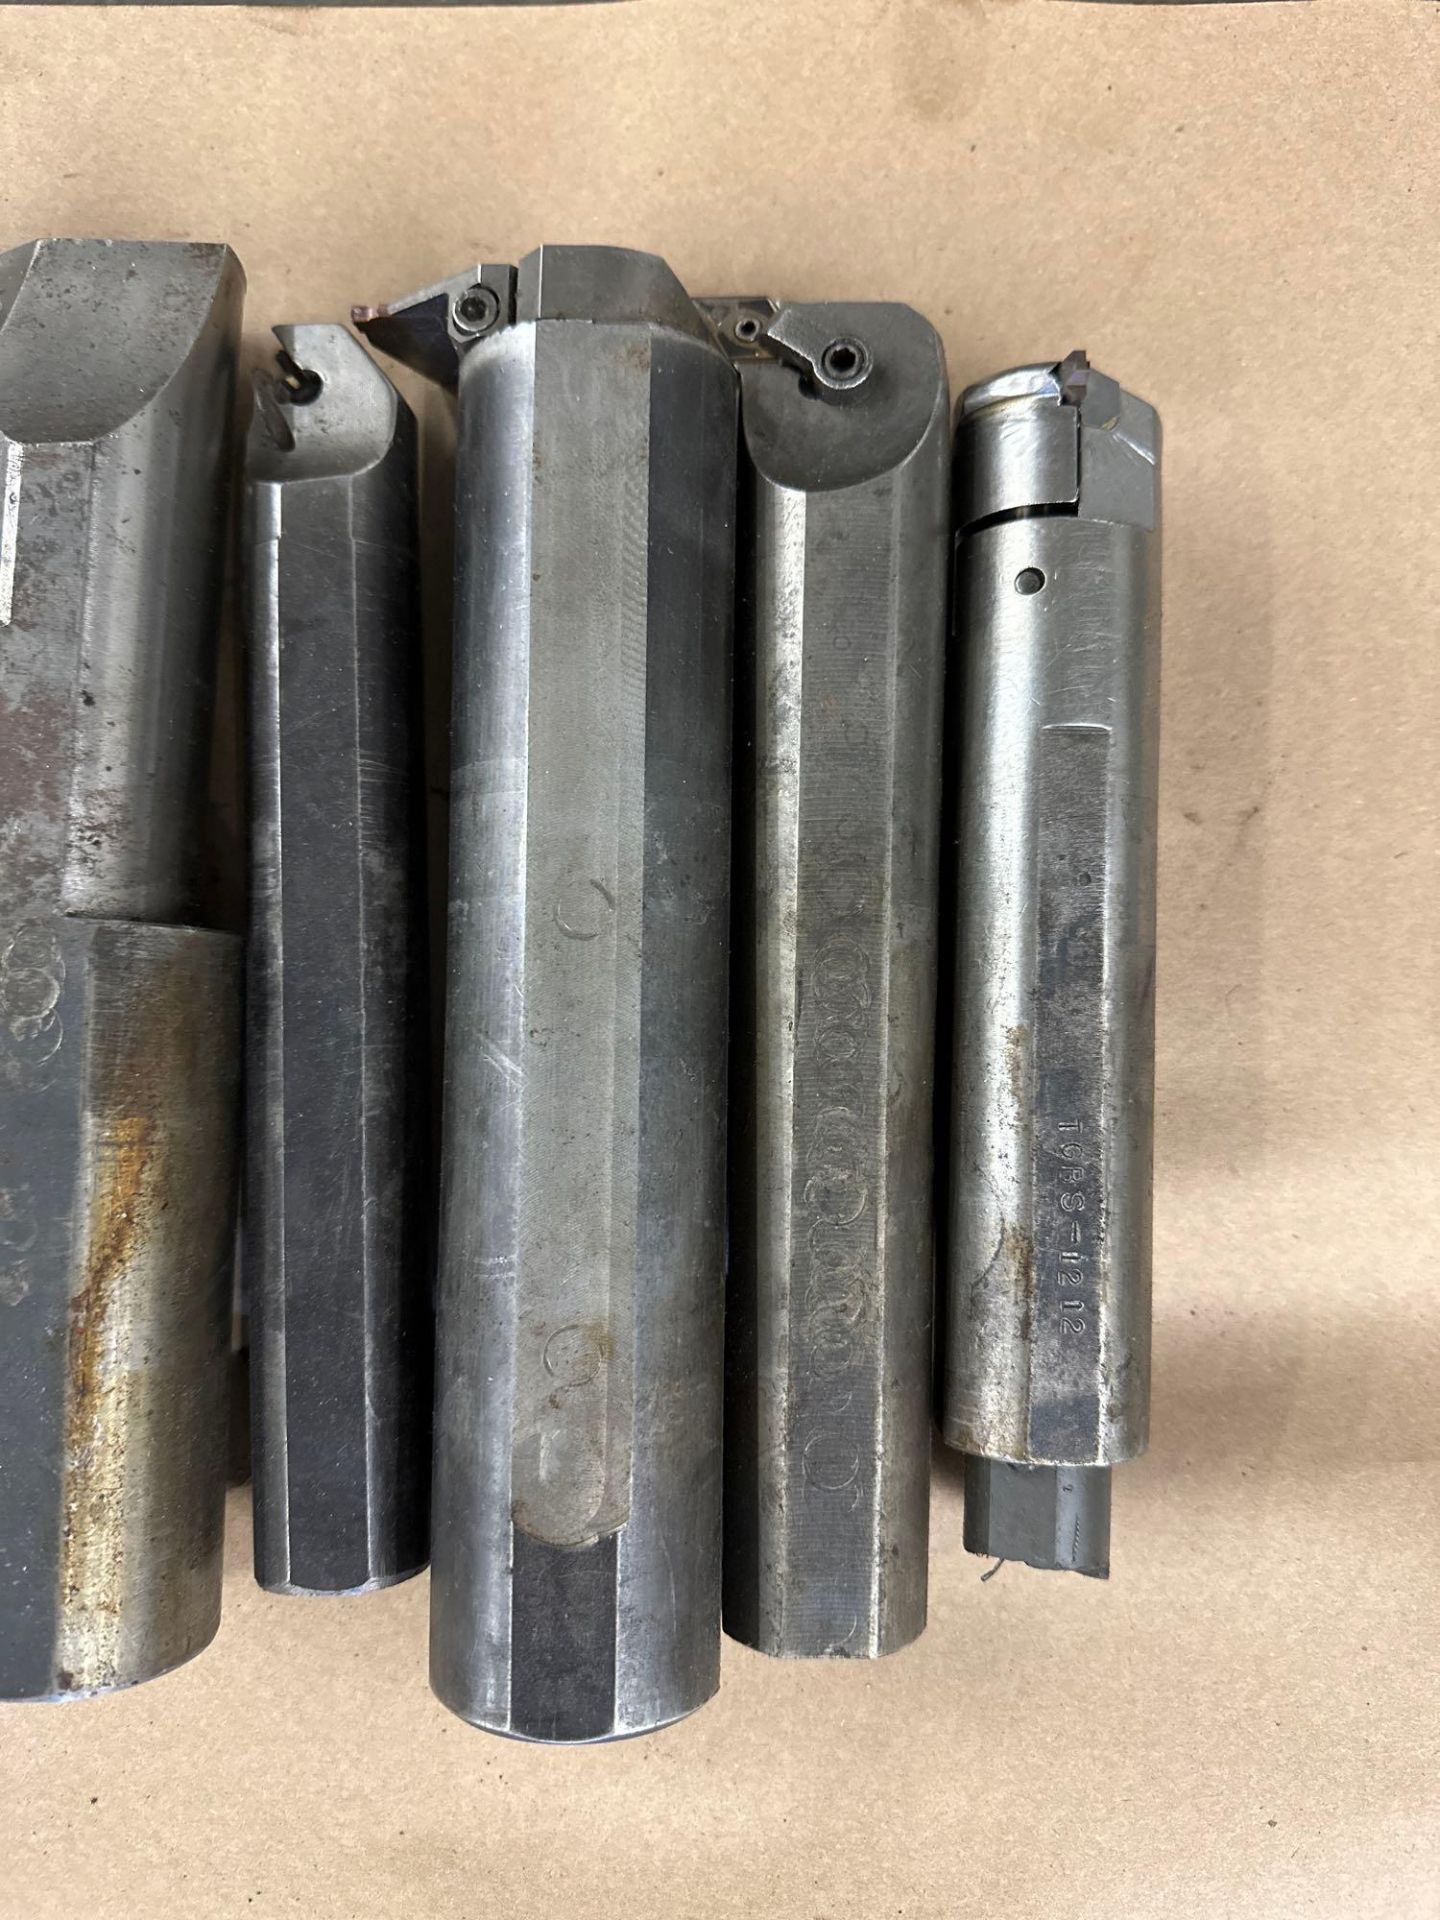 Lot of 10 Assorted Indexable Boring Bars Ranging From: 1 1/4” X 9 1/8” to 2 3/8” X 16” - Image 2 of 7